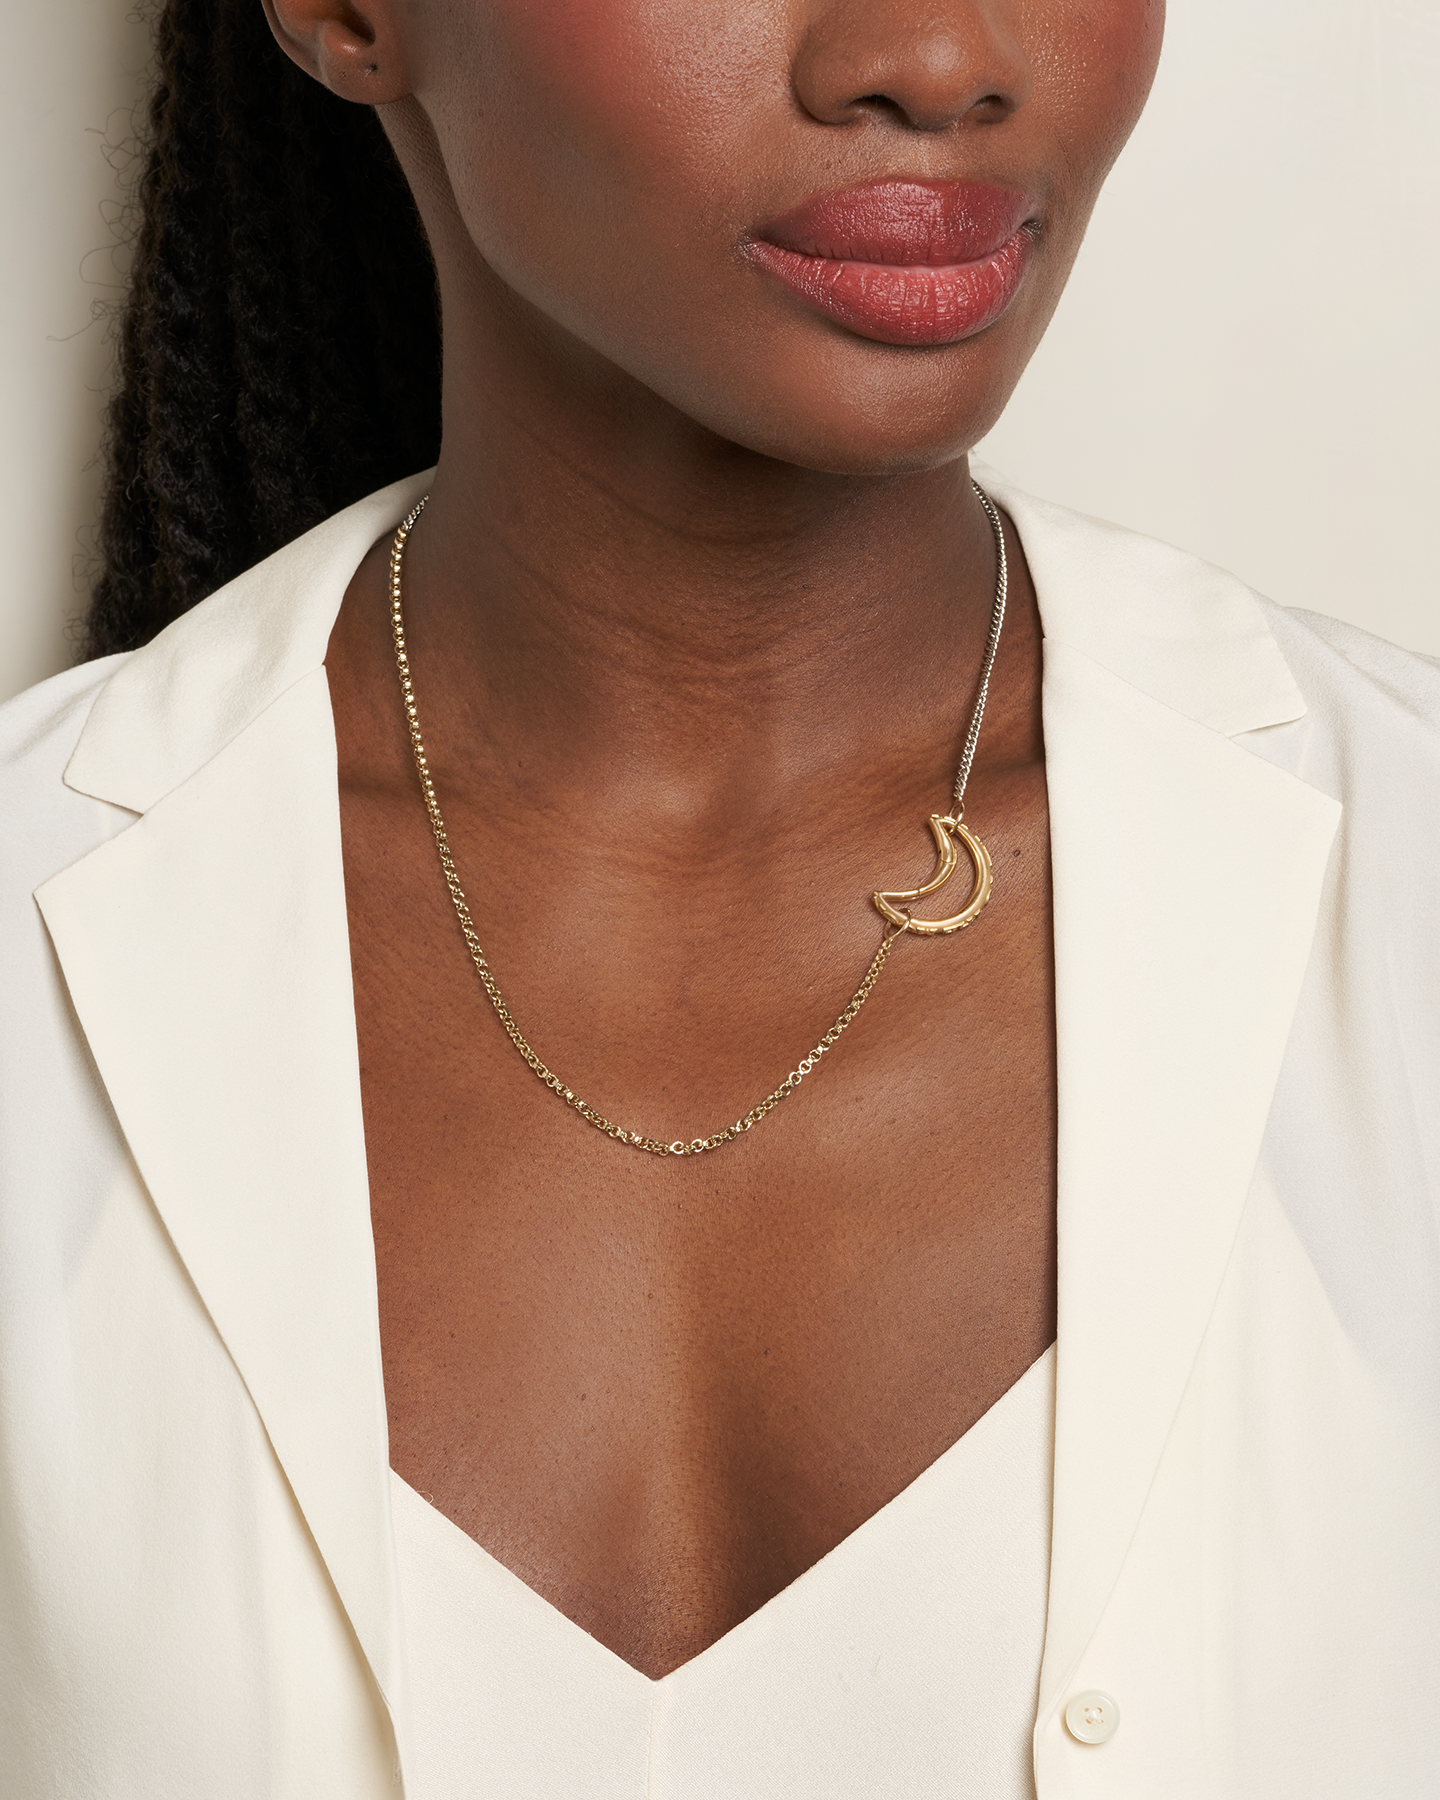 Close up of woman's decolletage wearing long gold and silver two tone chain necklace with moon charm on the right side